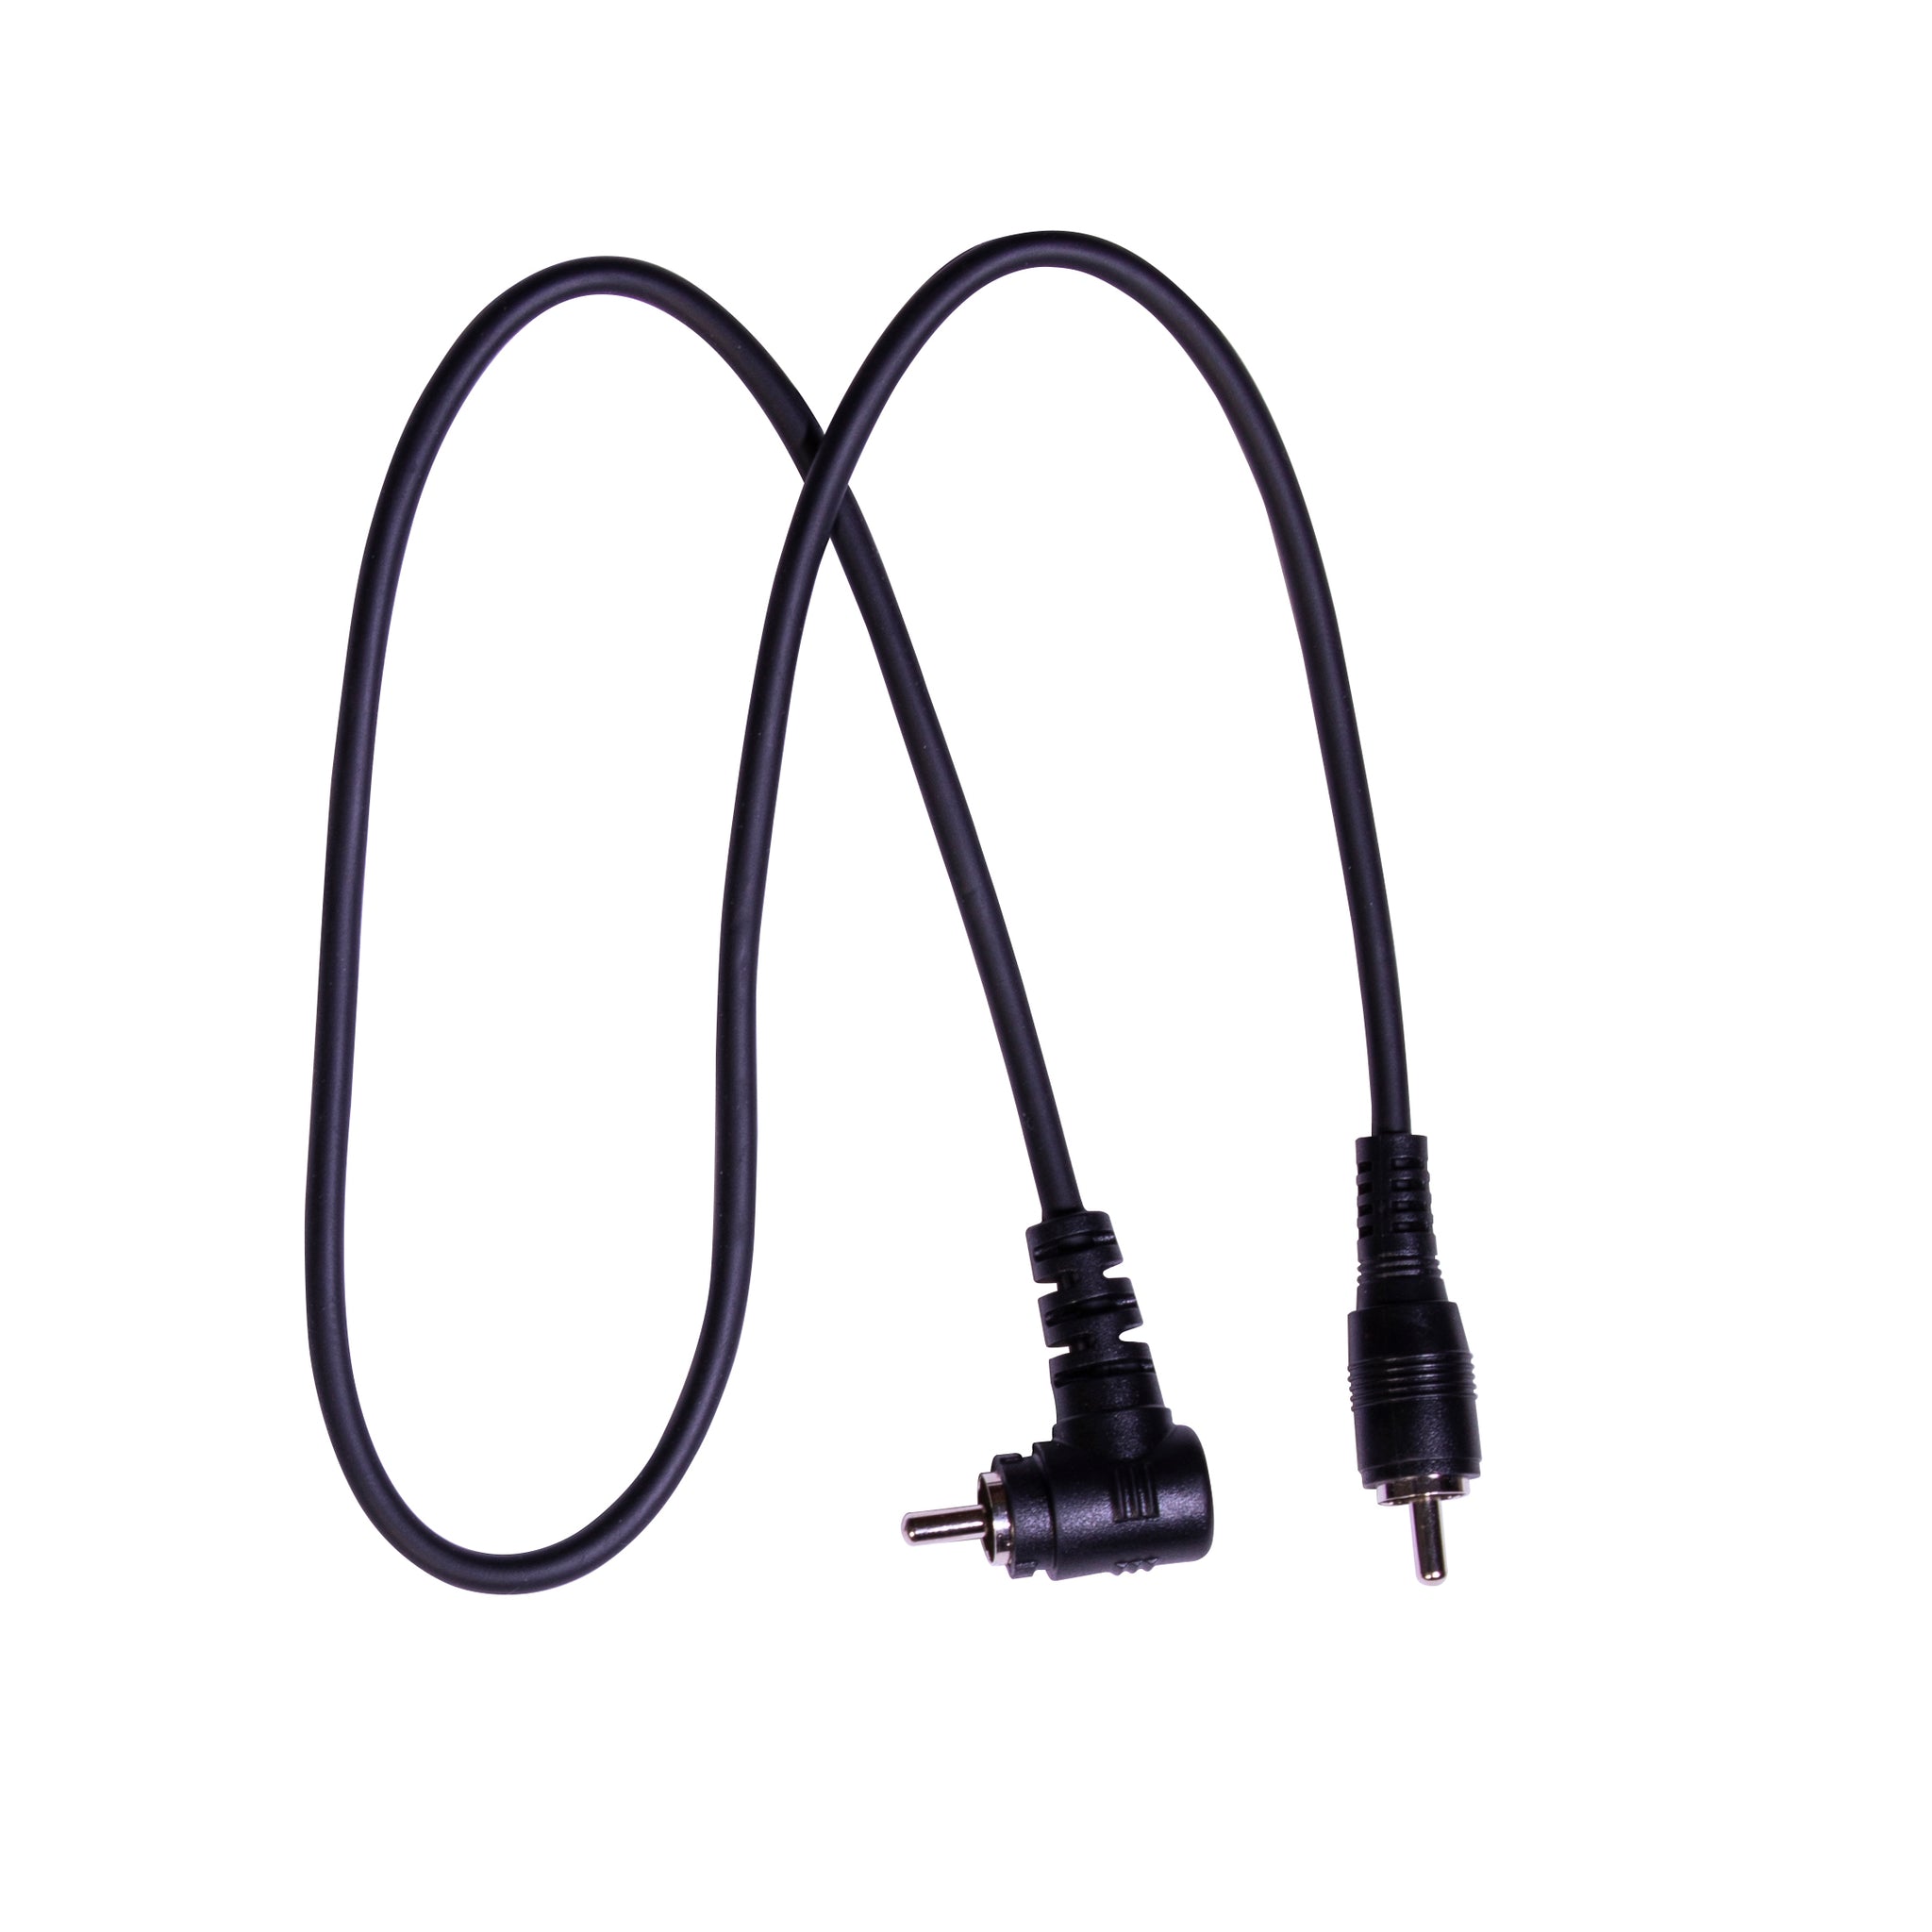 Power Cable for Delta Ignite Helmets (R3, R3L, R4)